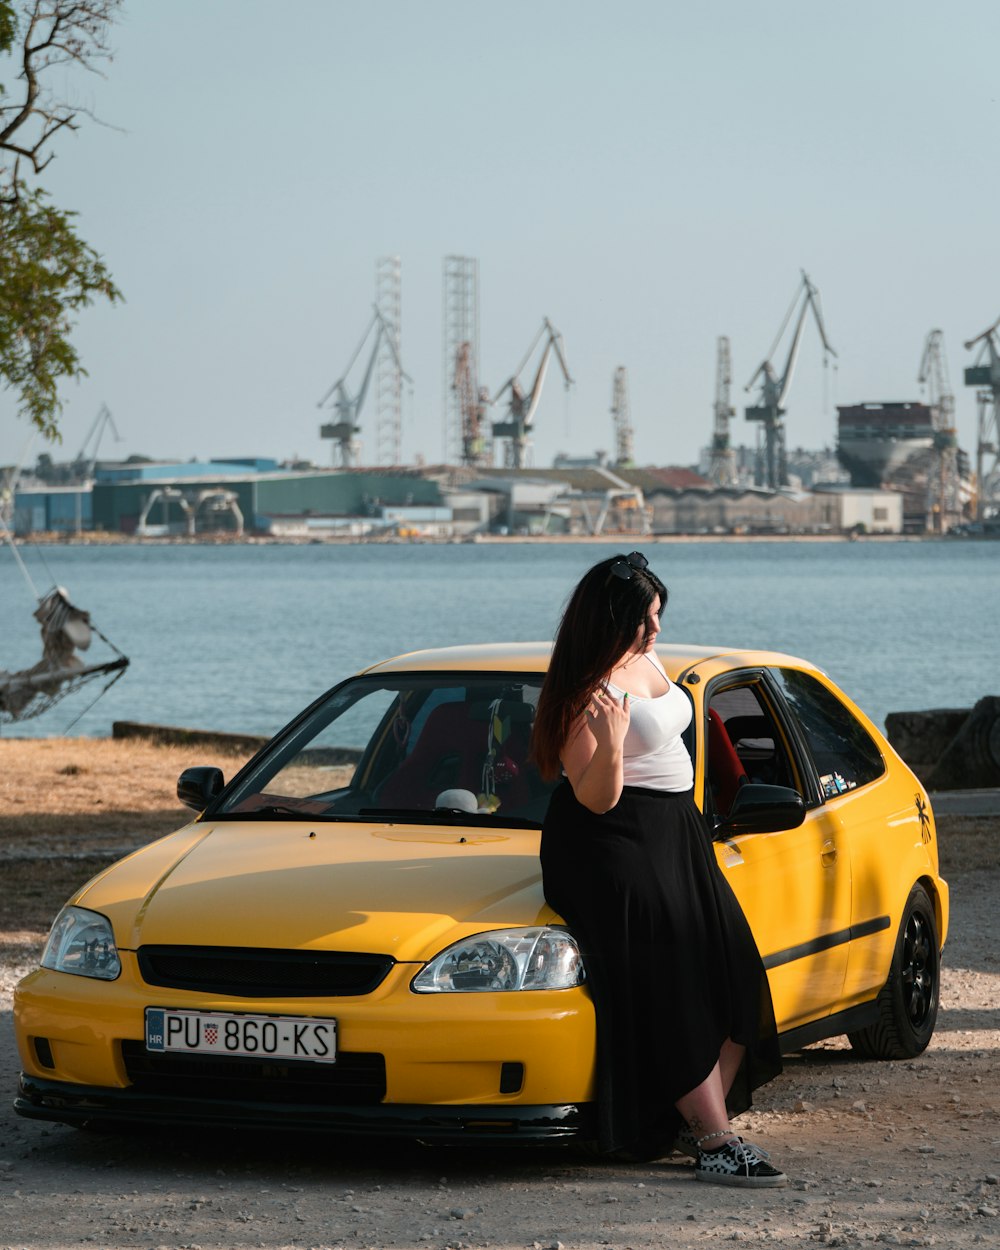 a woman leaning on a yellow car in front of a body of water